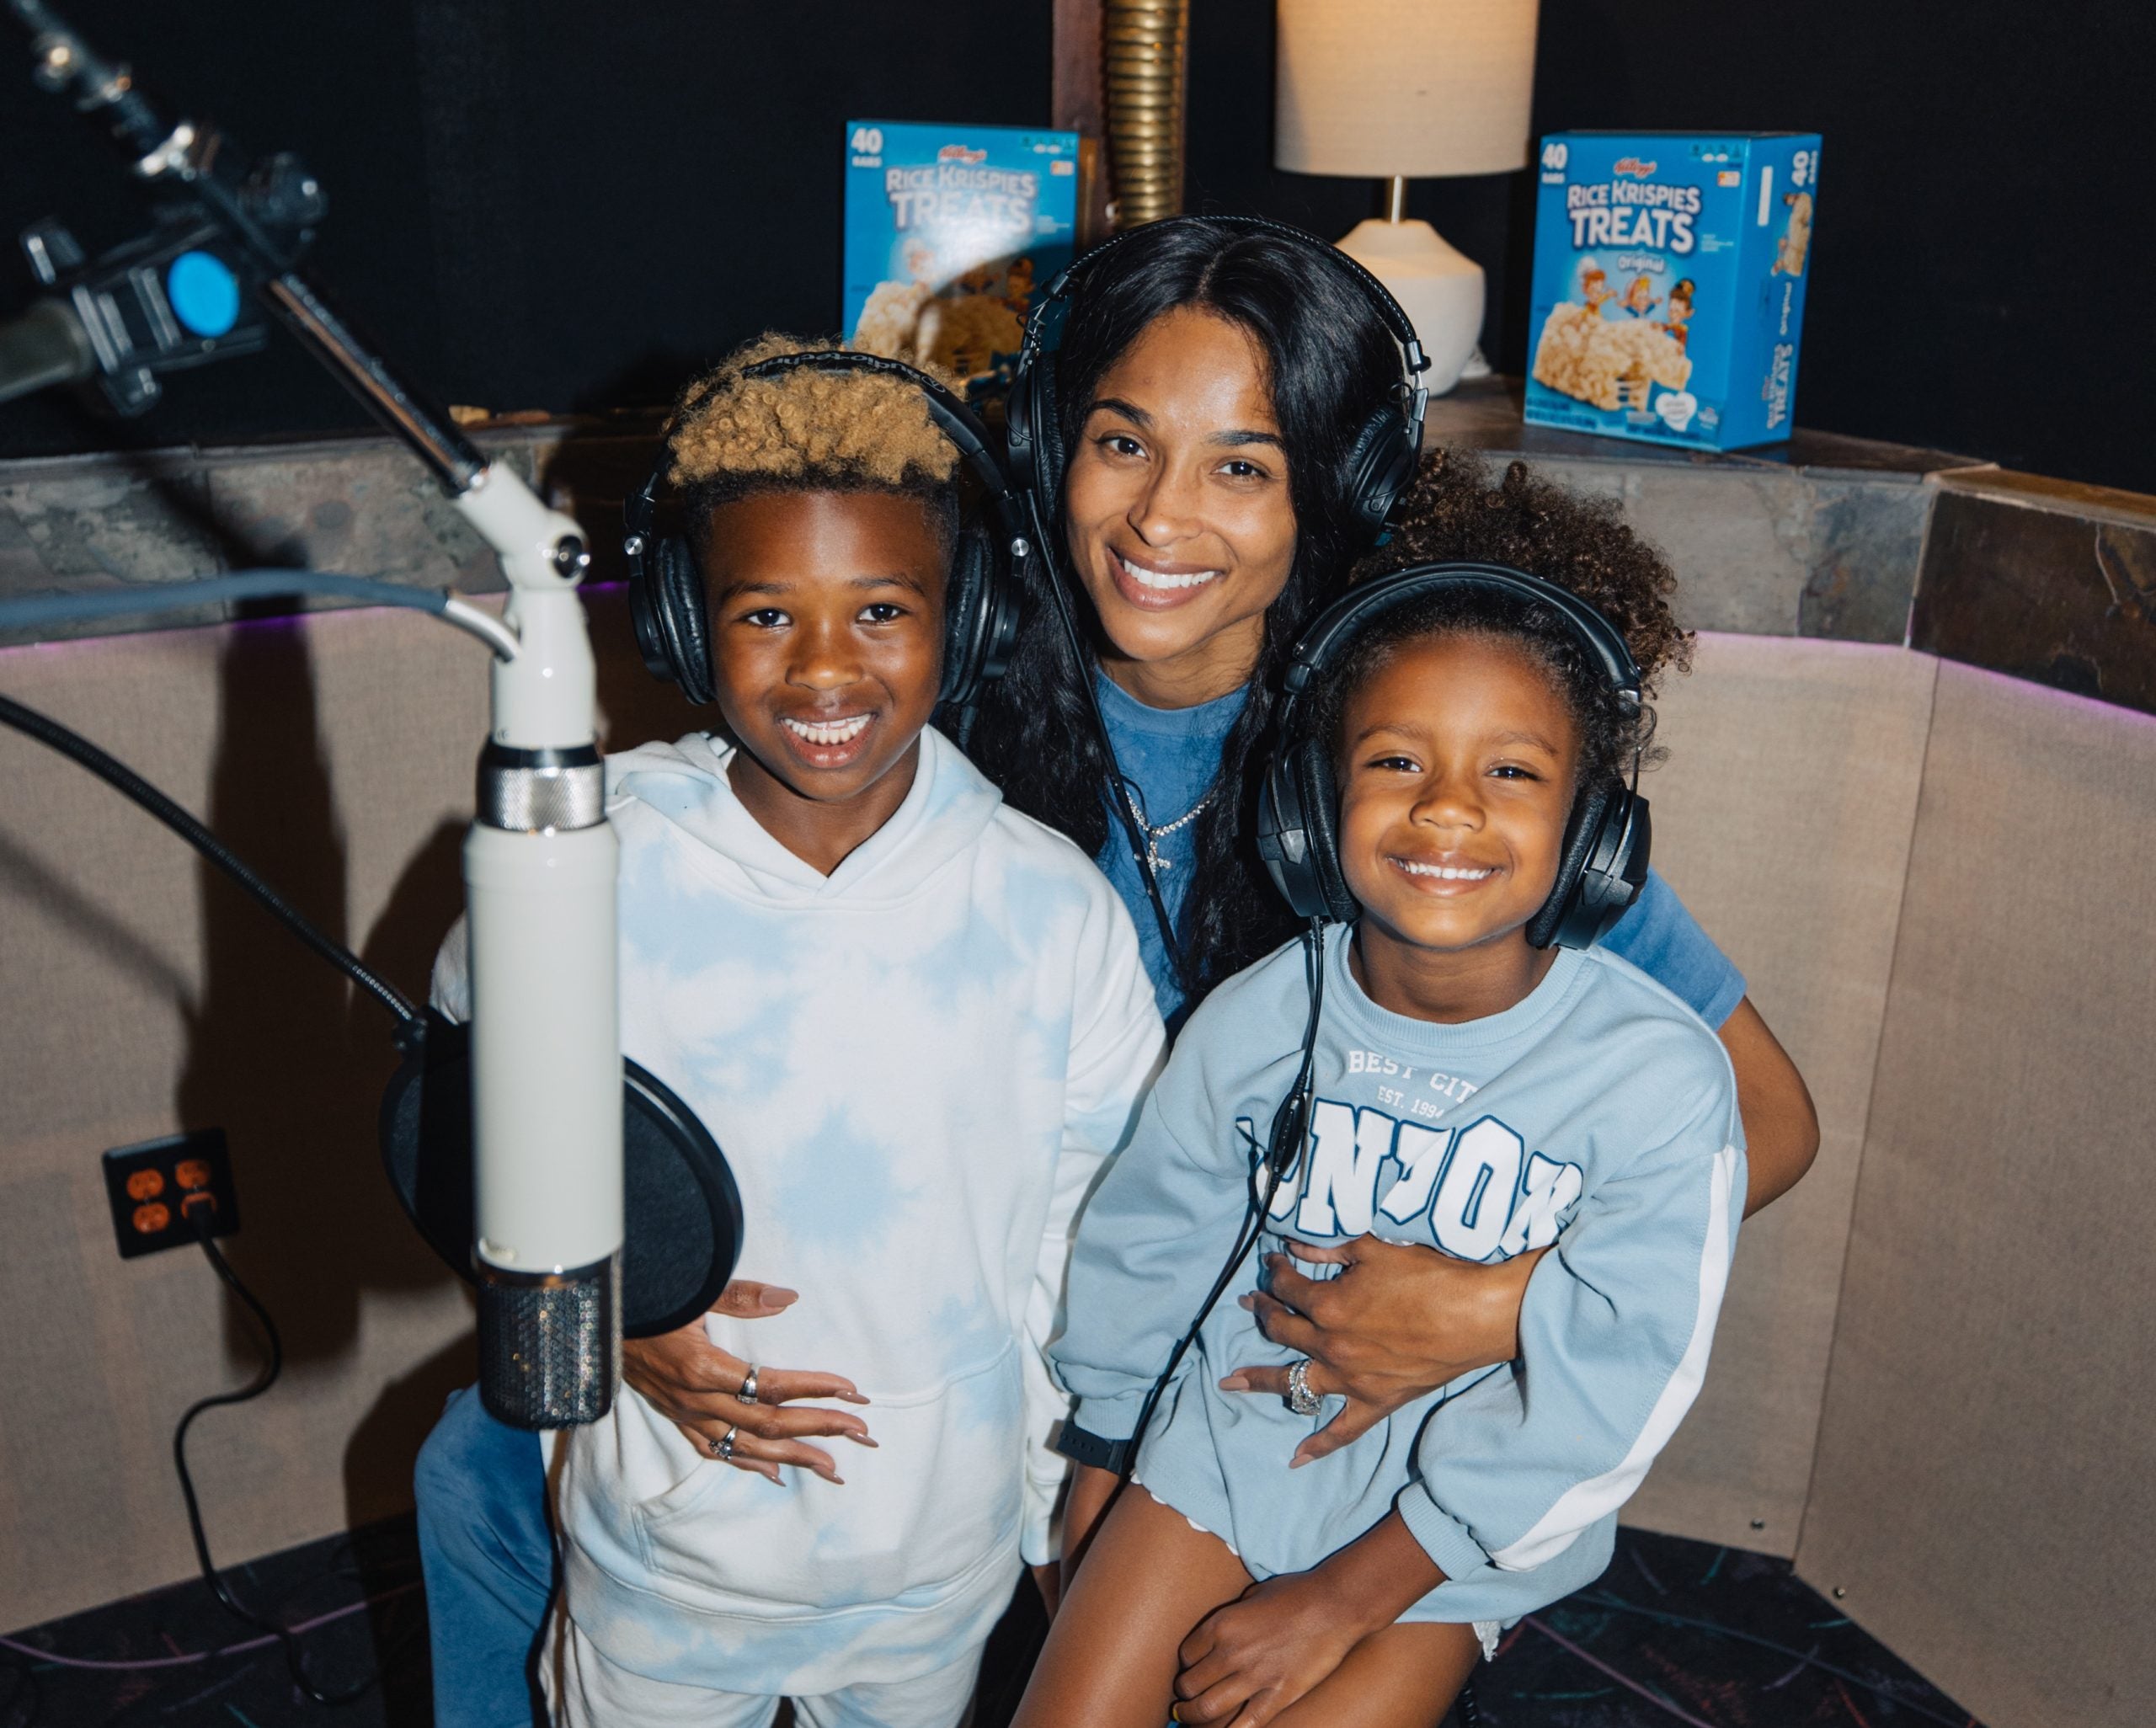 Ciara Has An Unexpected Collaborator For Her New Song ‘Treat’: Her Kids